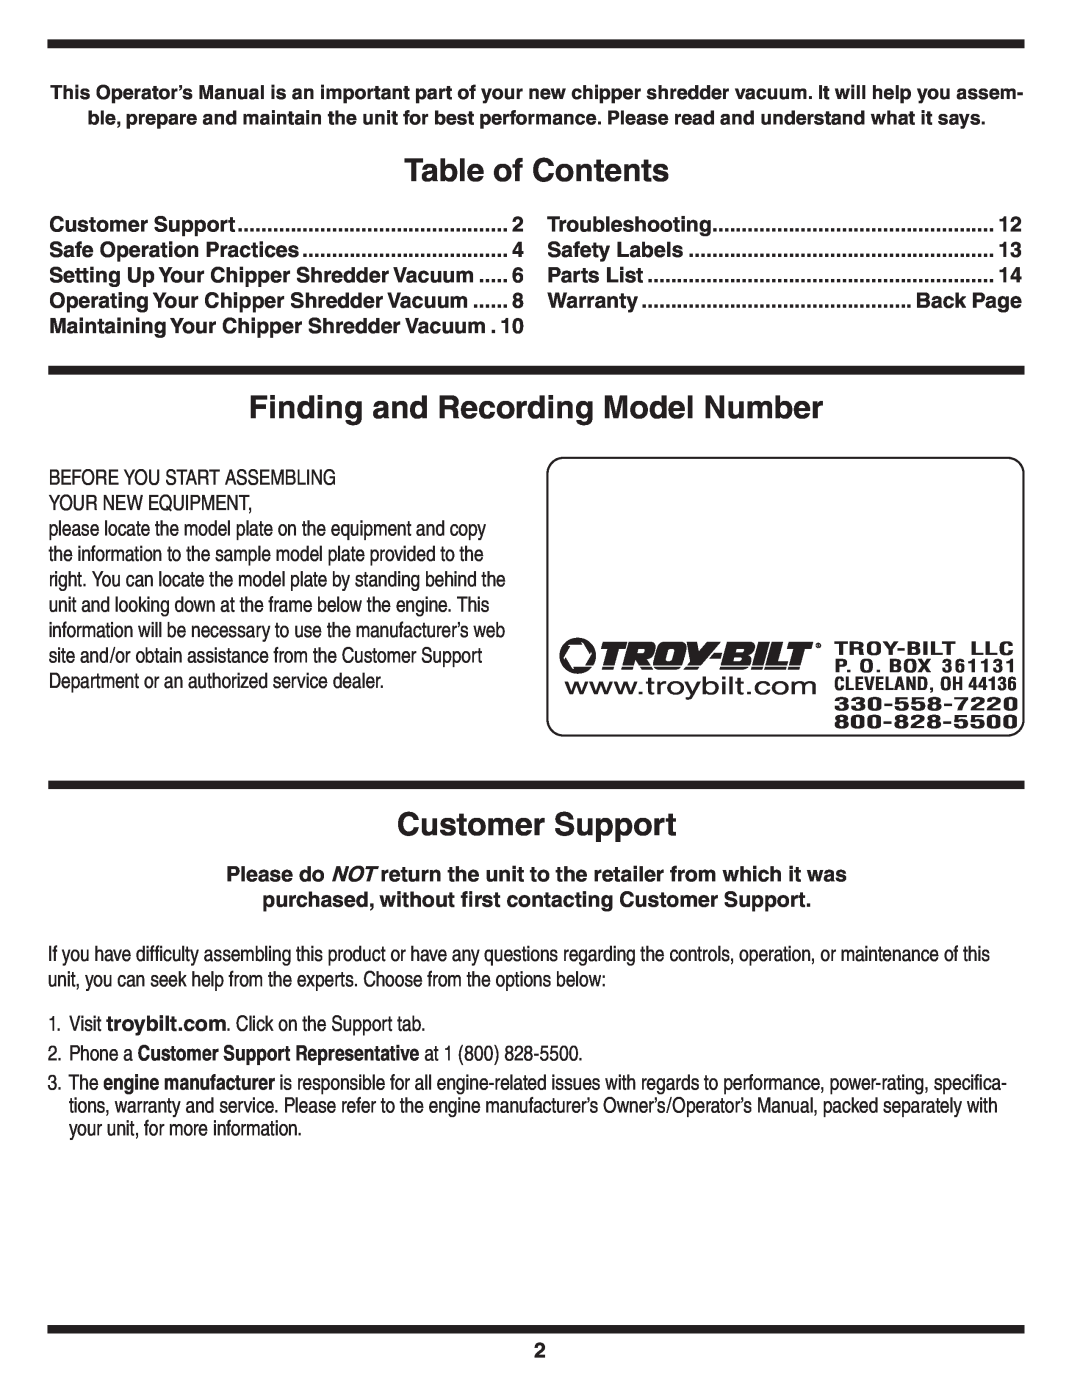 Troy-Bilt 204 Table of Contents, Finding and Recording Model Number, Customer Support, Safe Operation Practices, Back Page 